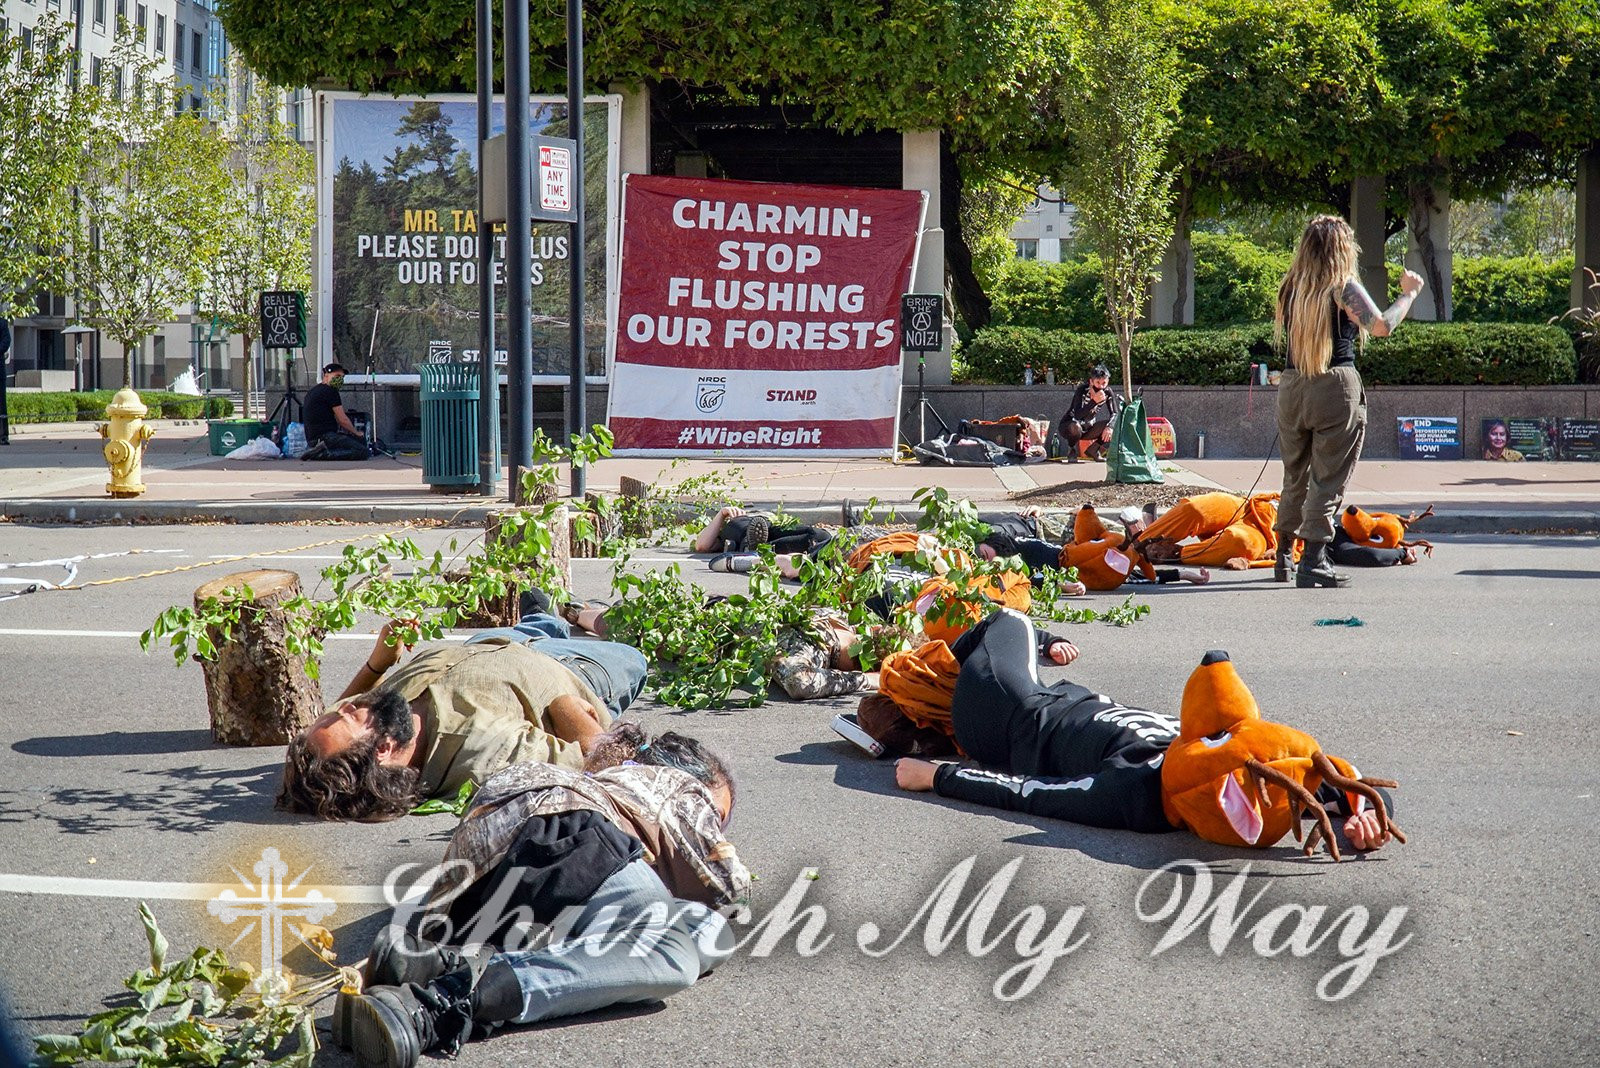 Activists demonstrate against alleged deforestation by Procter and Gamble outside company headquarters in Cincinnati, Ohio, on Oct. 12, 2021. Photo courtesy of Tina Gutierrez/Stand.earth